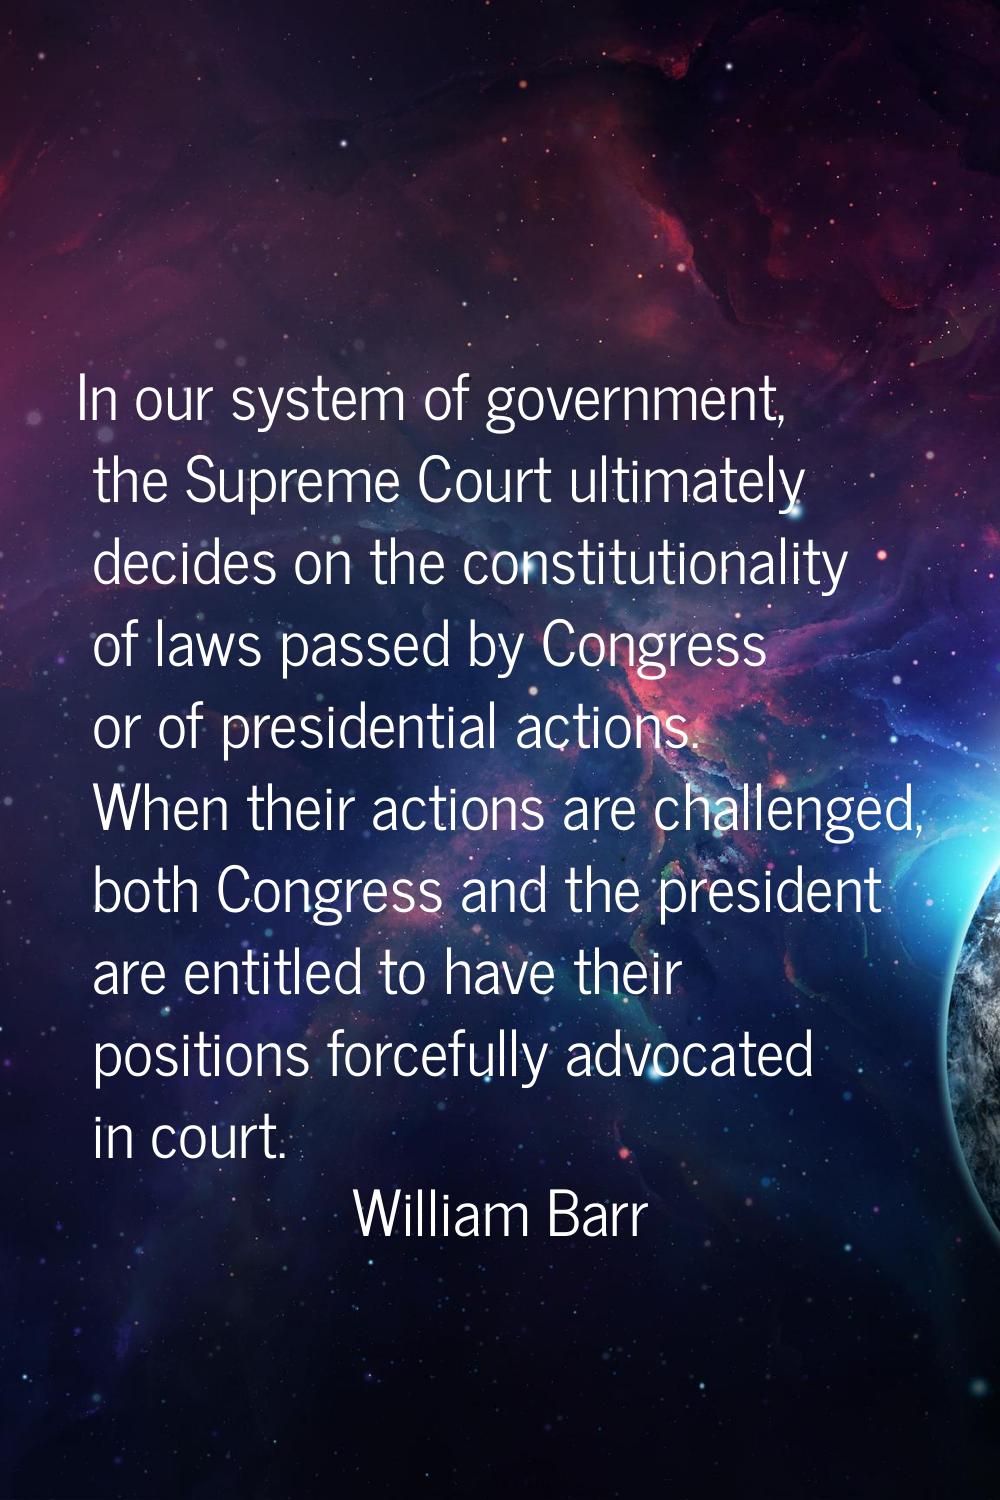 In our system of government, the Supreme Court ultimately decides on the constitutionality of laws 